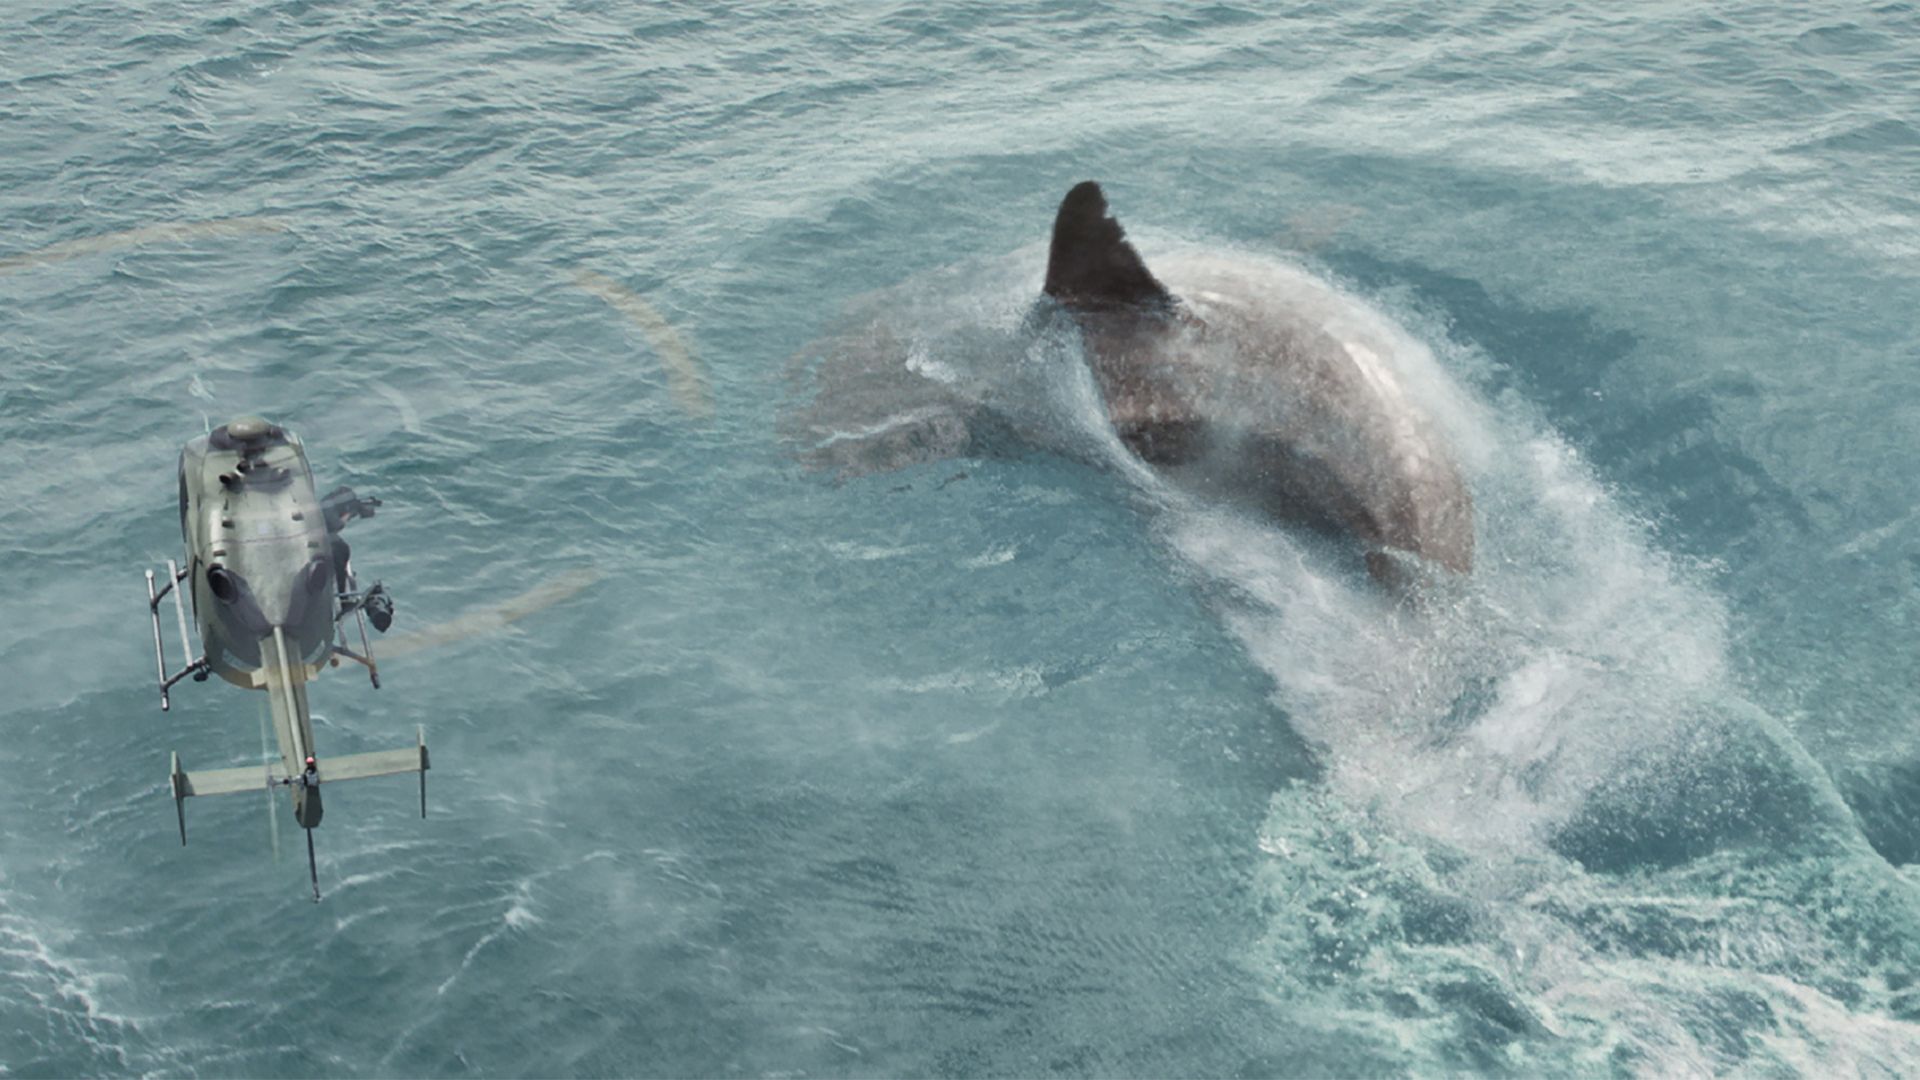 The eponymous giant shark of the film "The Meg" swims in the ocean.